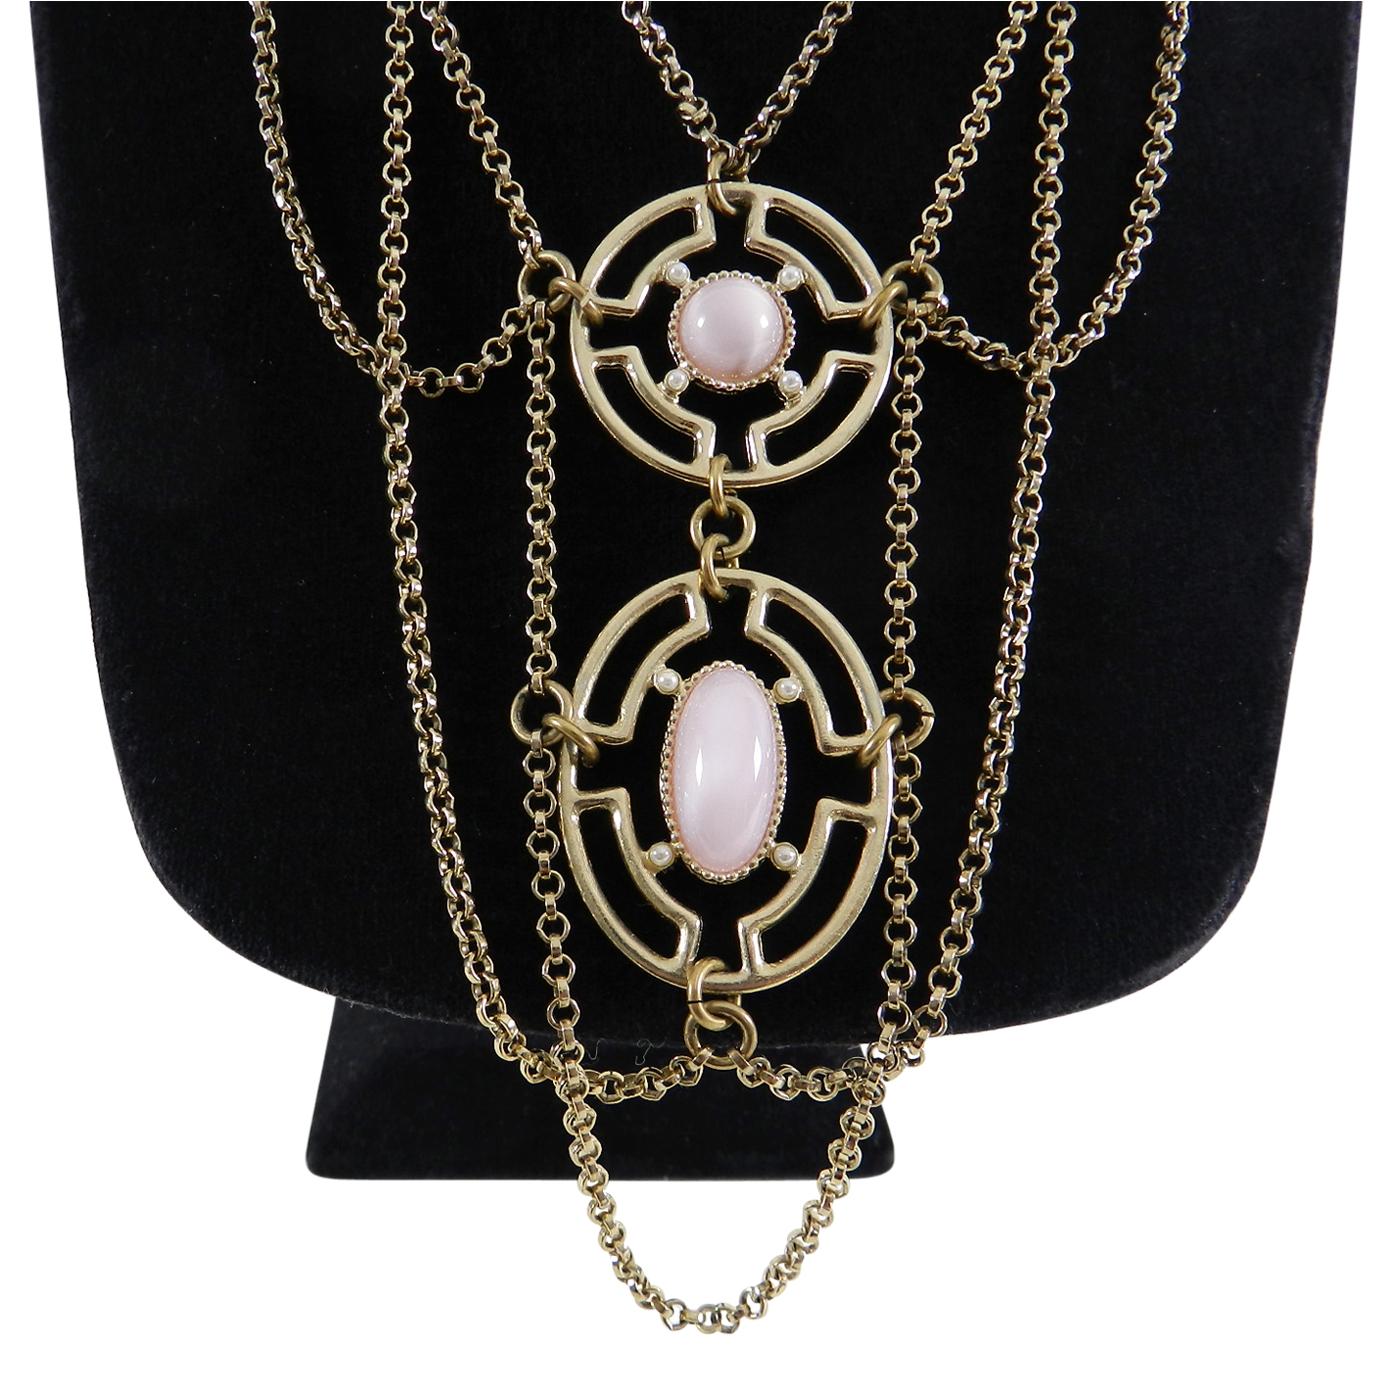 Women's Lanvin Gold and Pink Bib Necklace with Ribbon Ties 